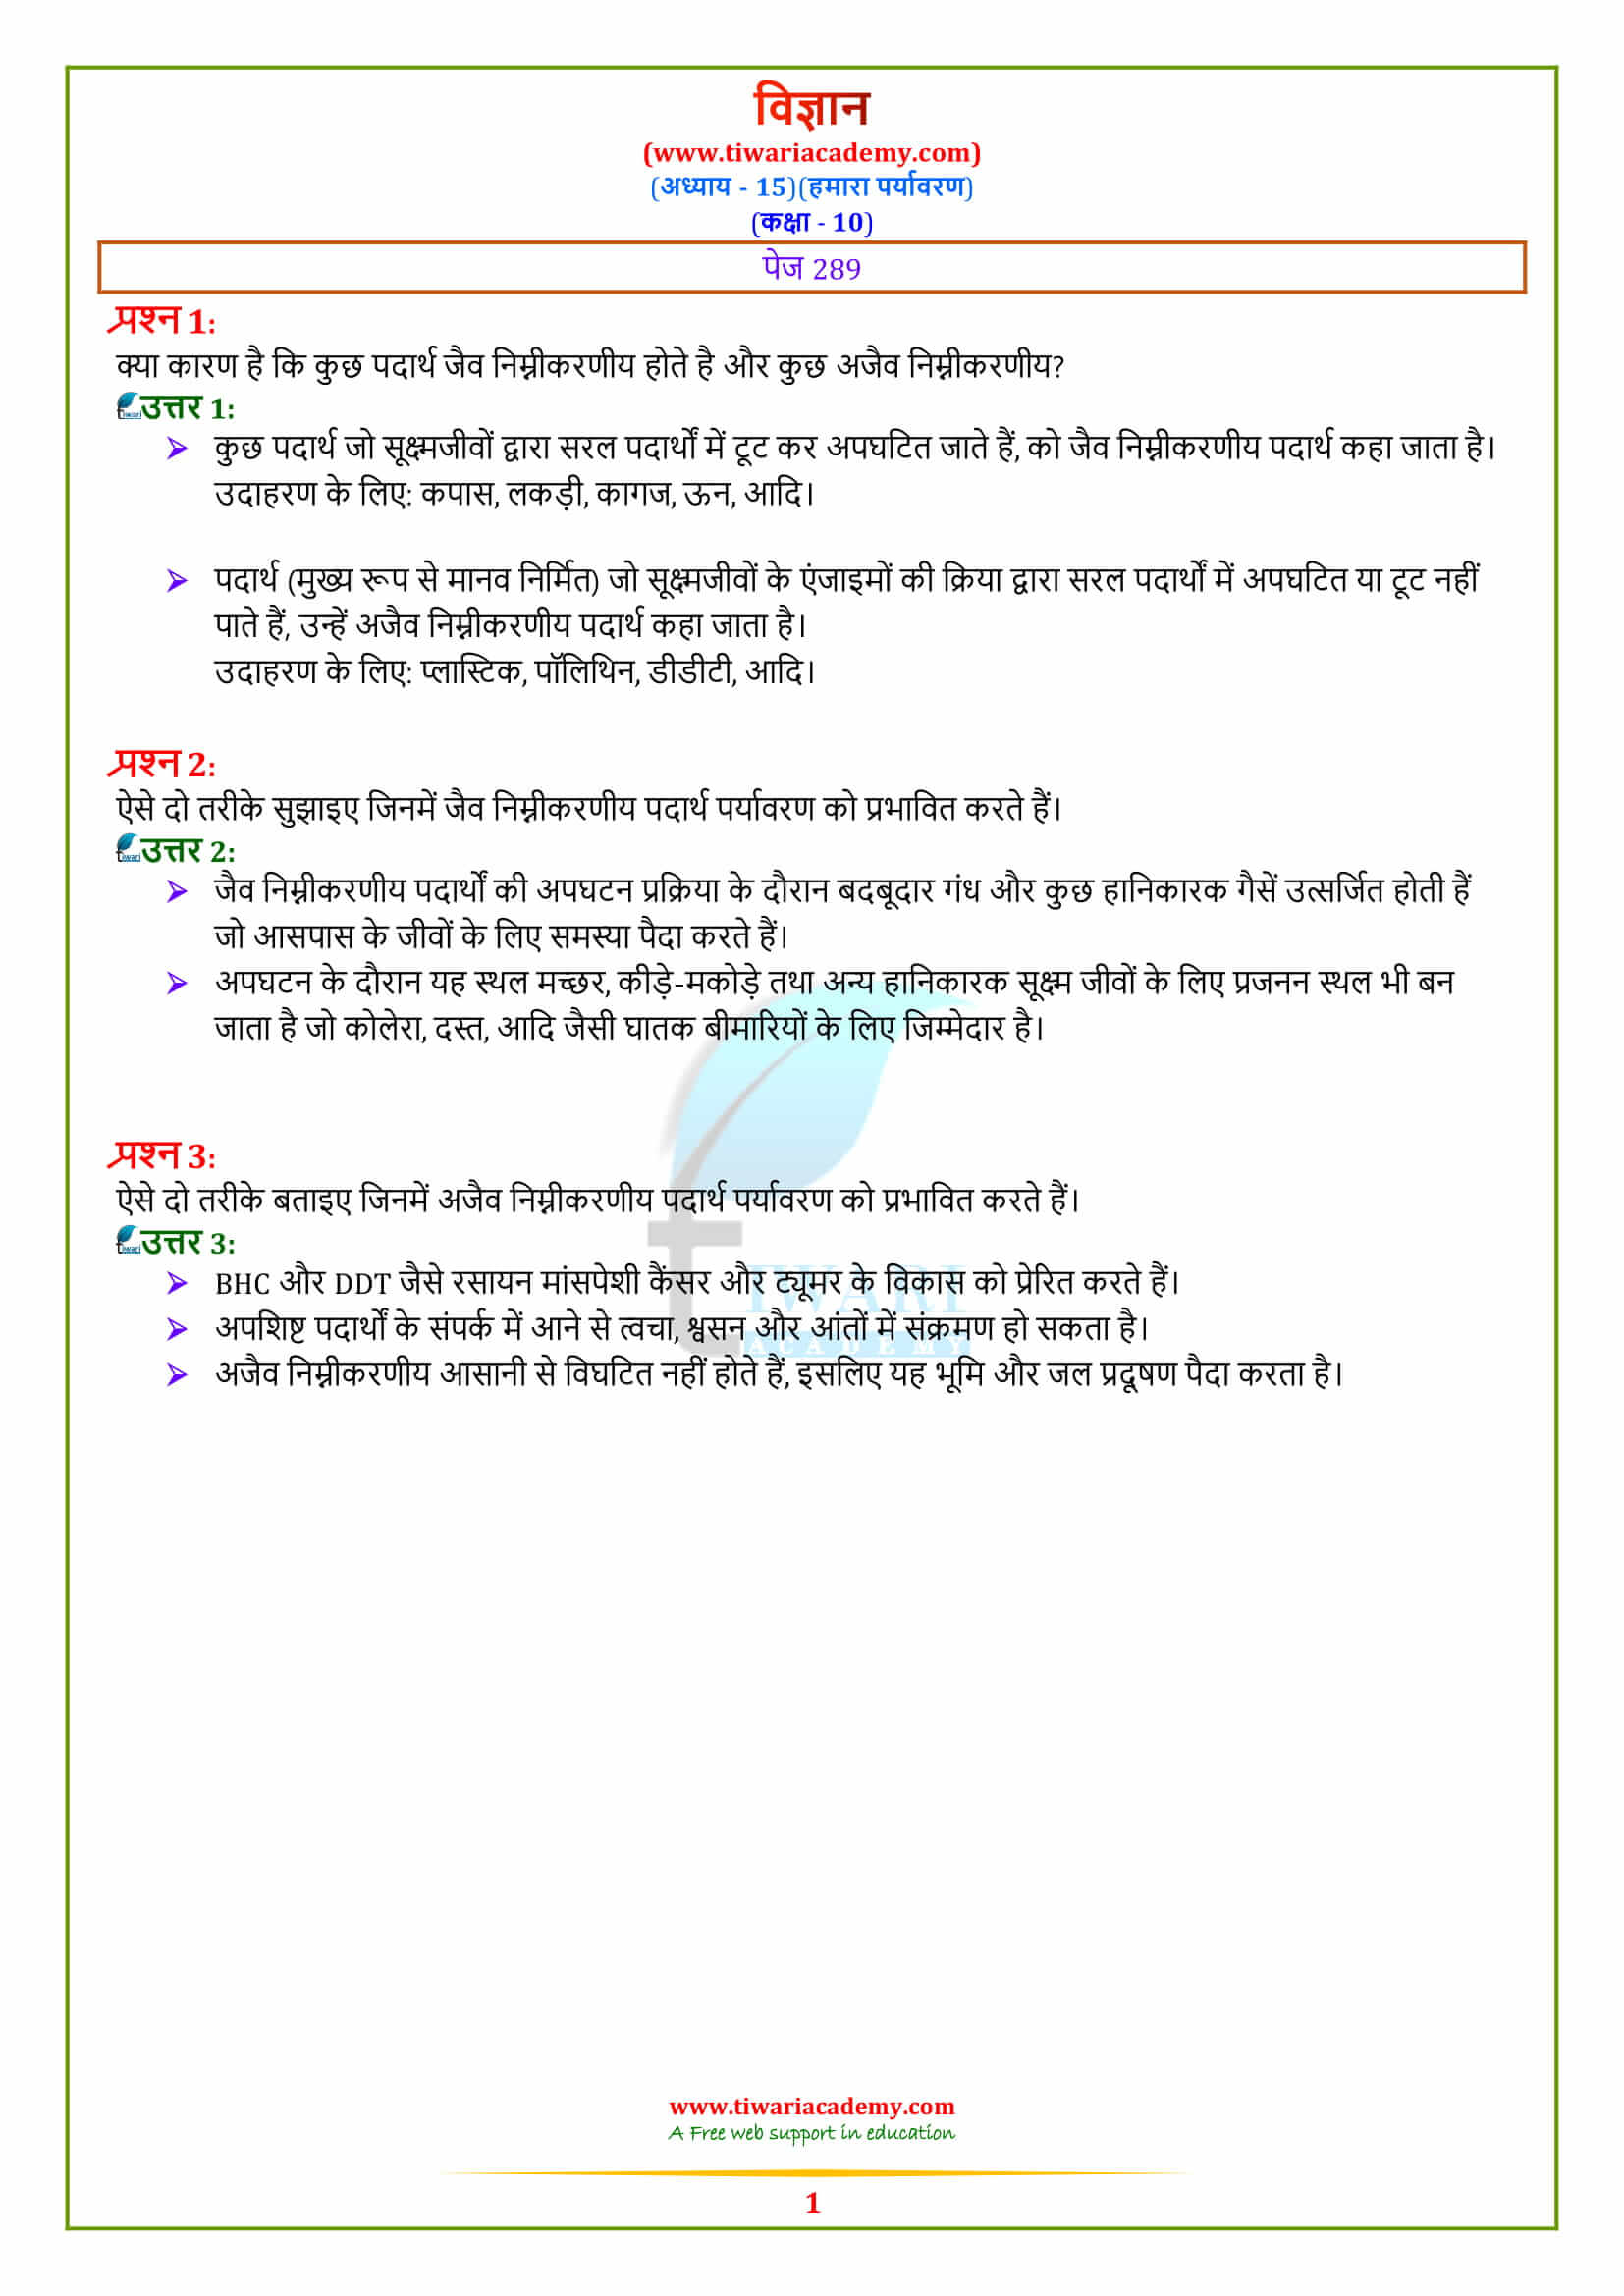 NCERT Solutions for Class 10 Science Chapter 15 page 289 in hindi